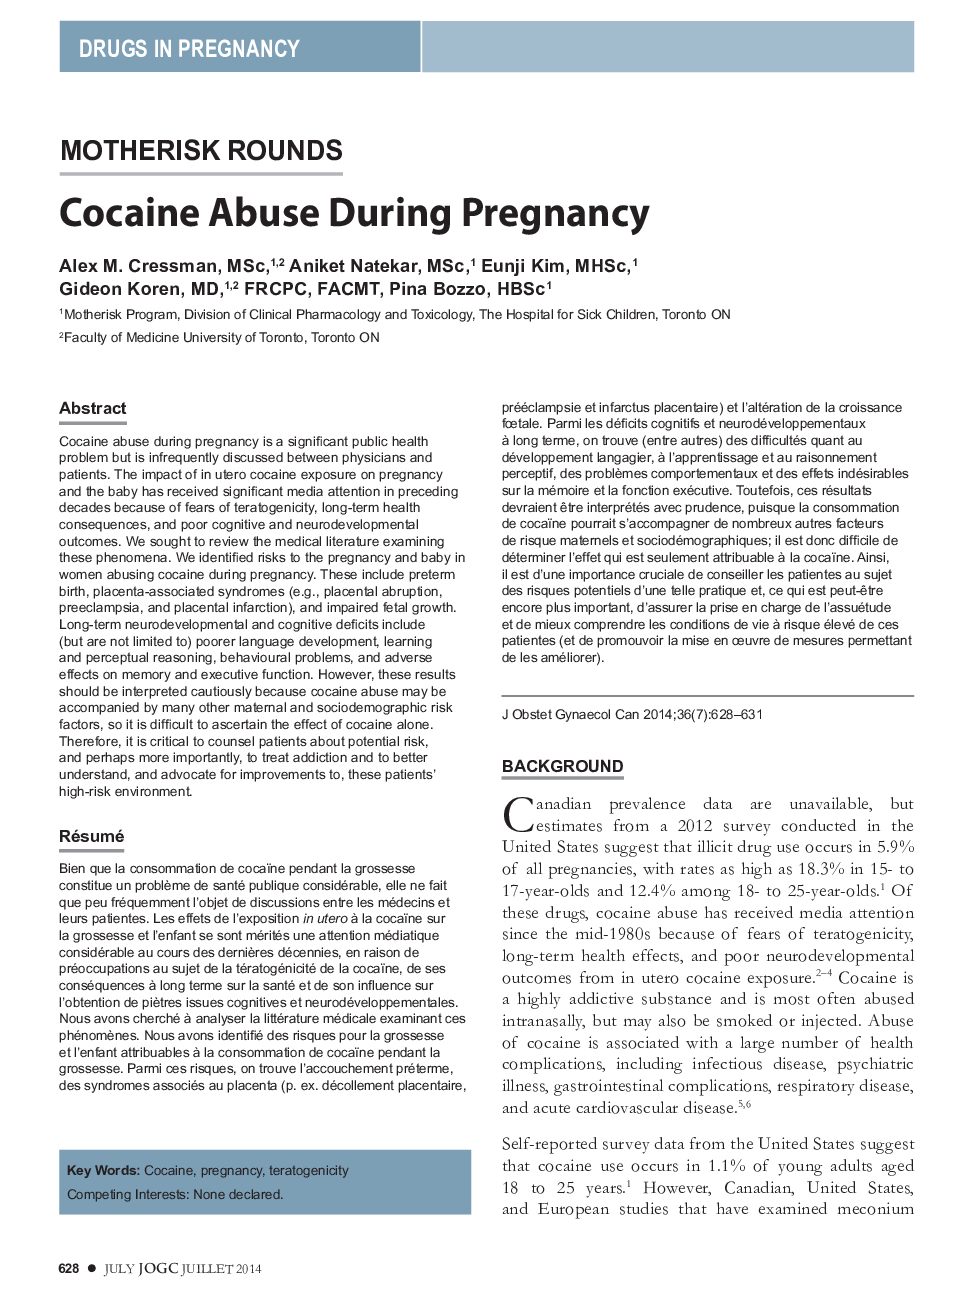 Cocaine Abuse During Pregnancy